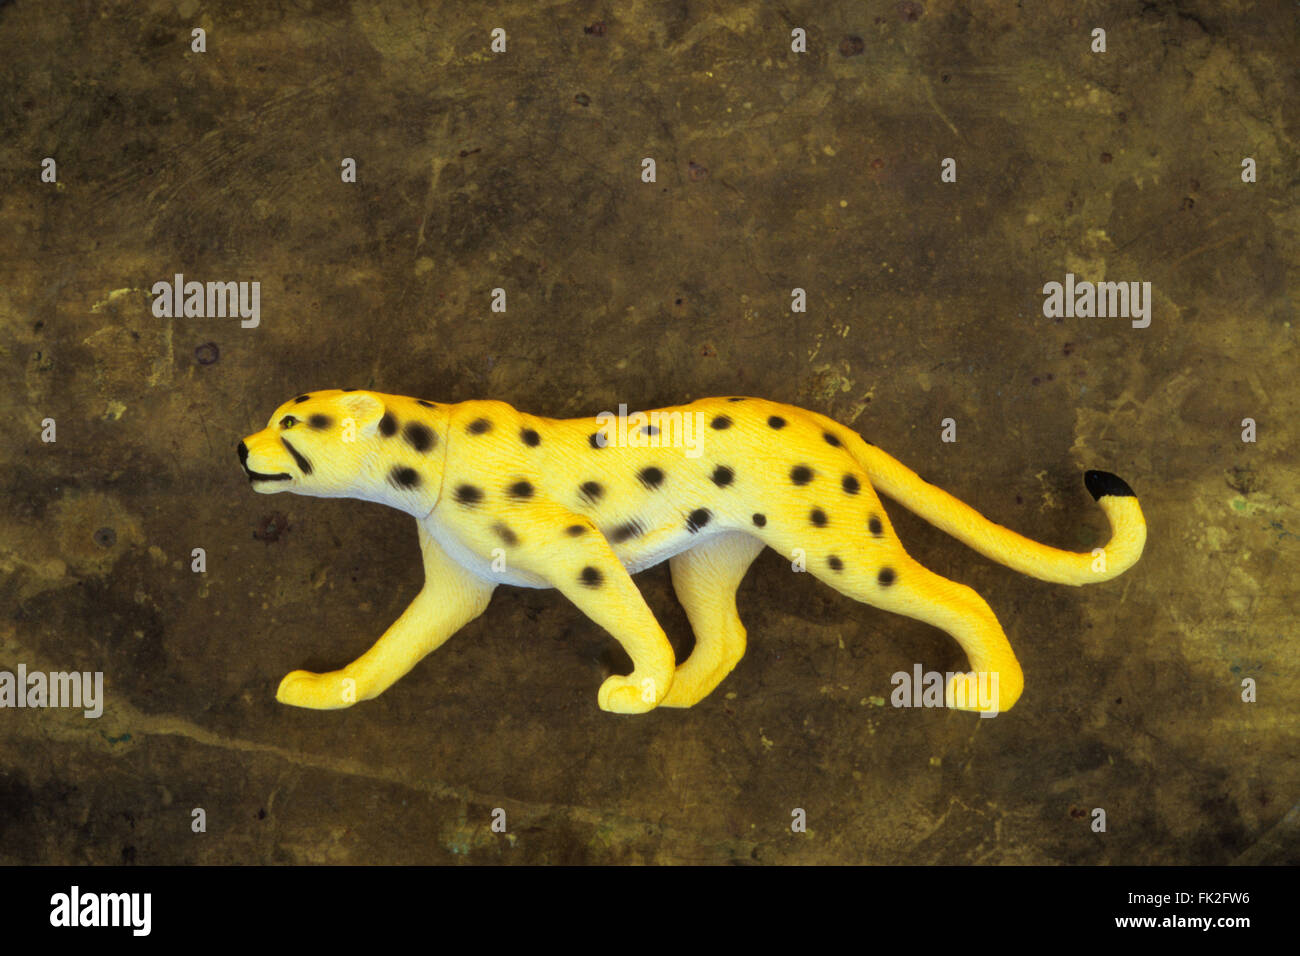 Plastic model of yellow cheetah with black spots in stalking position and lying on tarnished brass Stock Photo